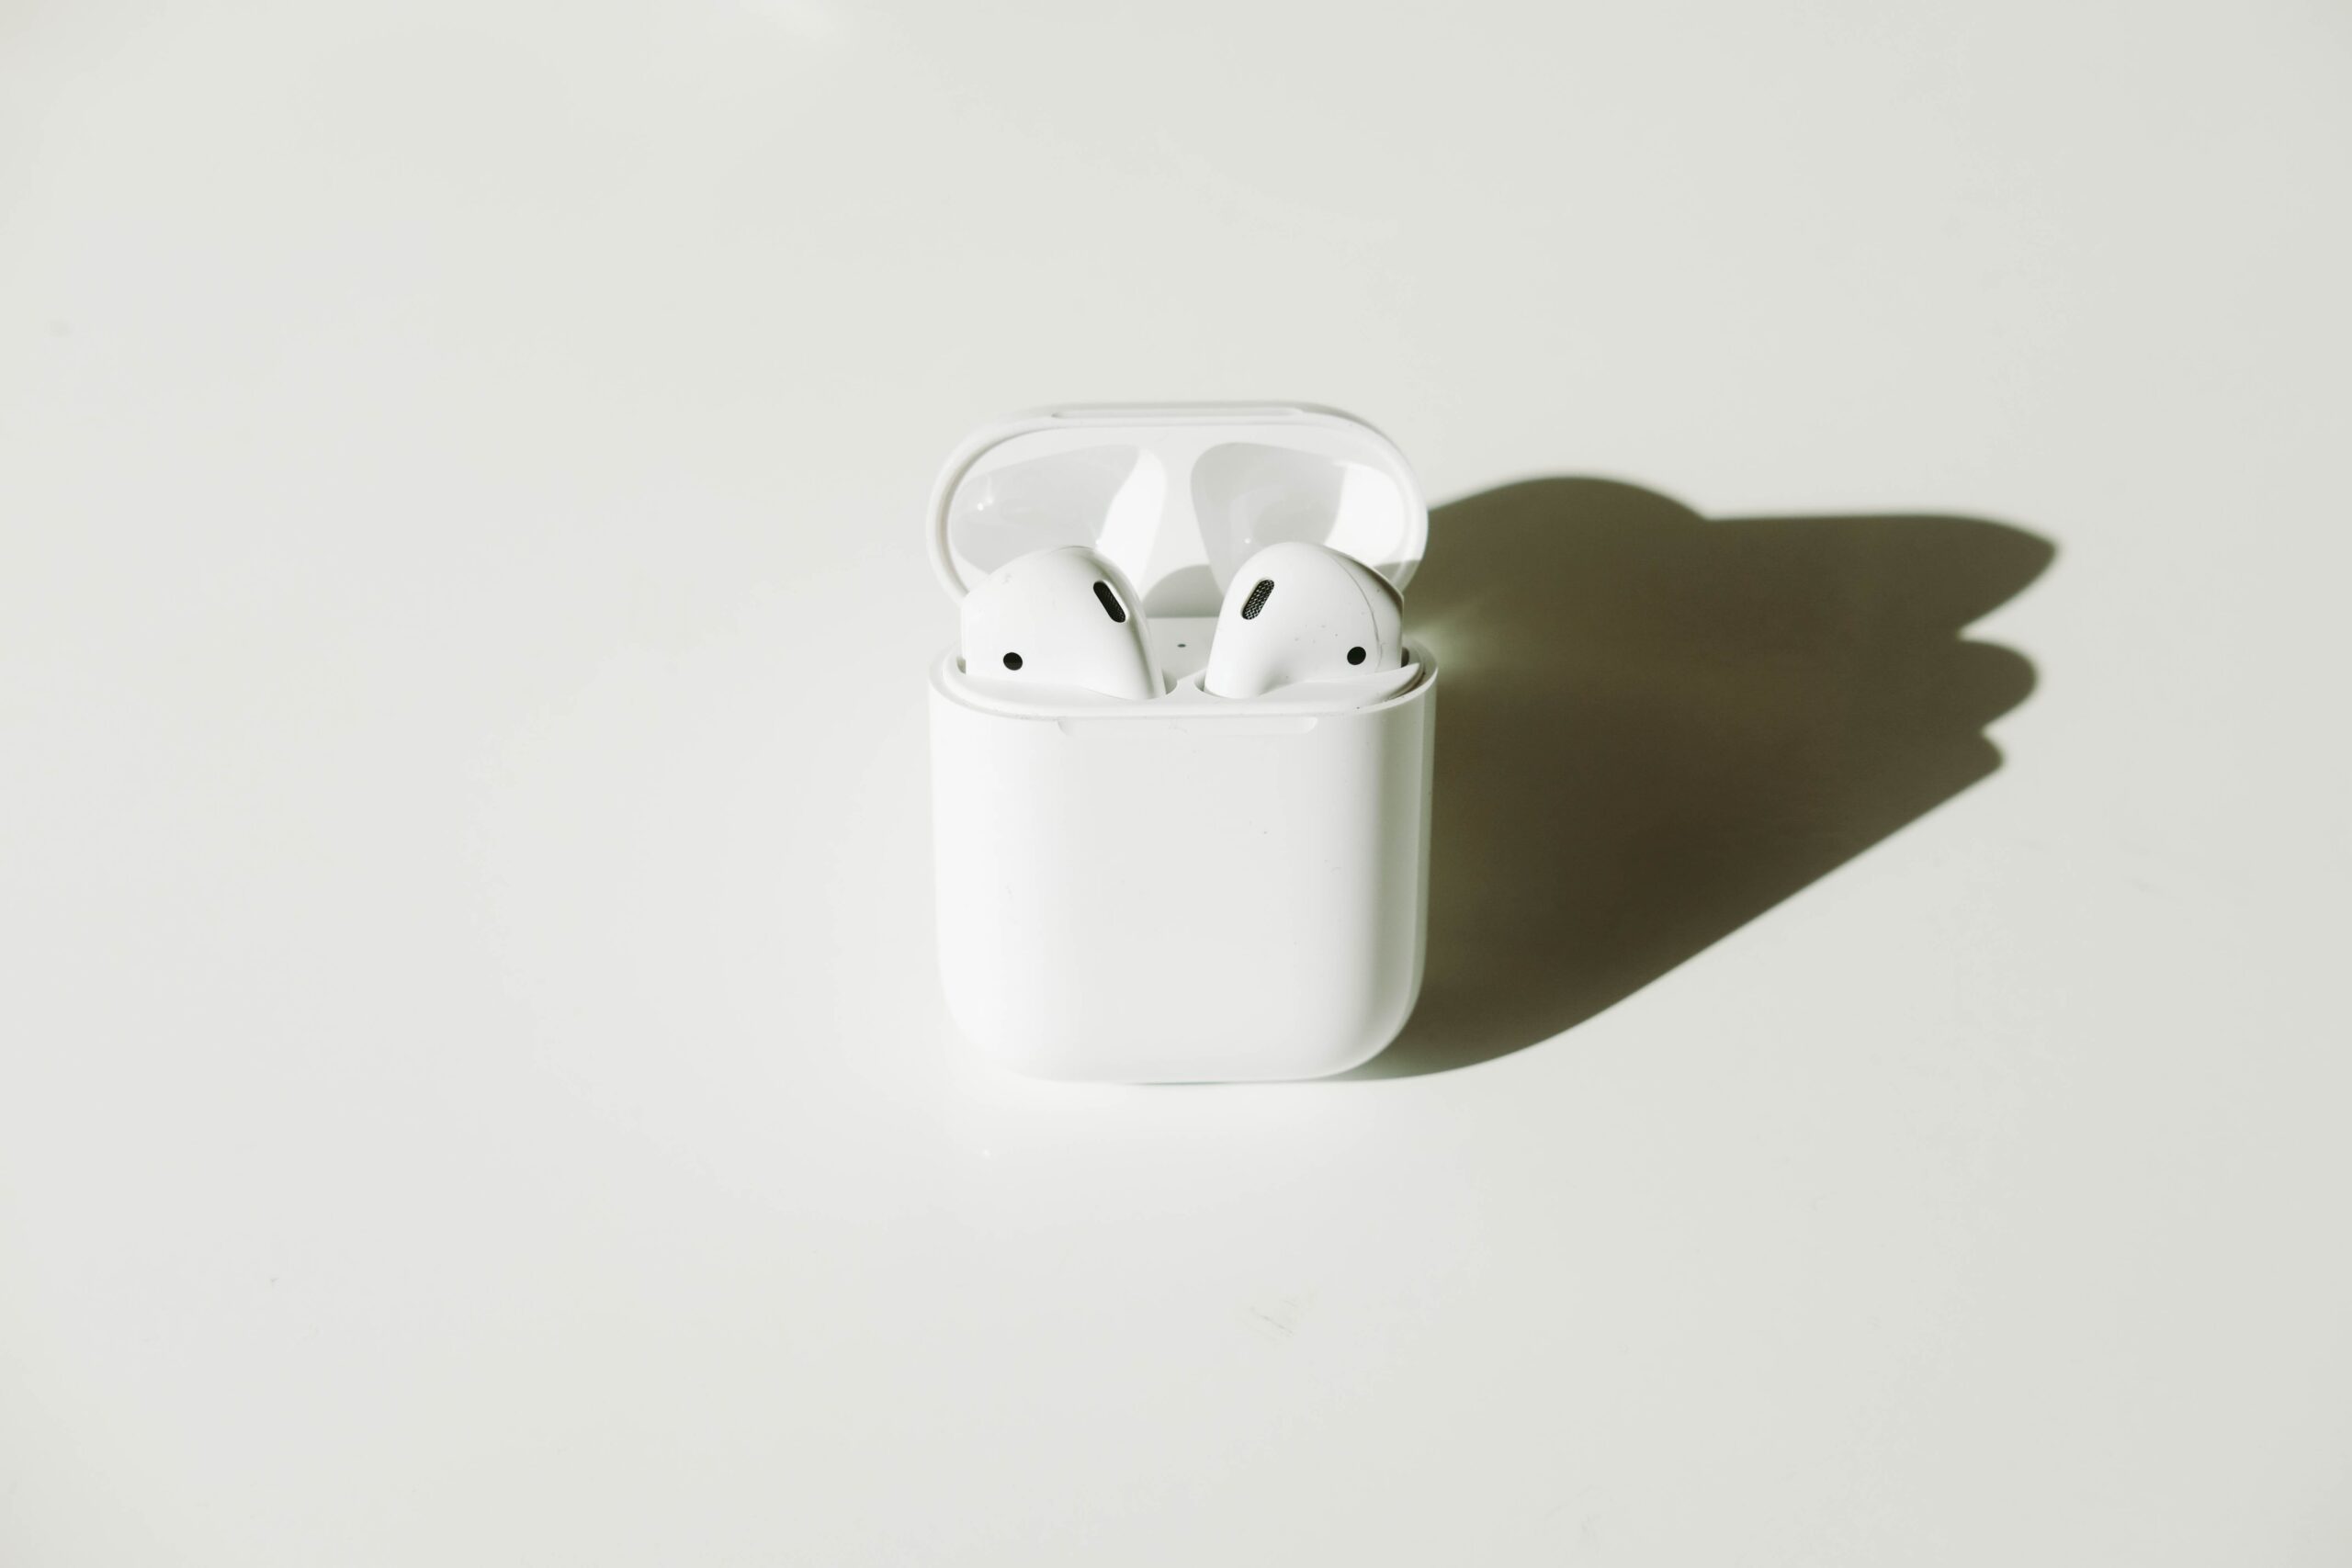 AirPods: Learn how to restart Apple devices